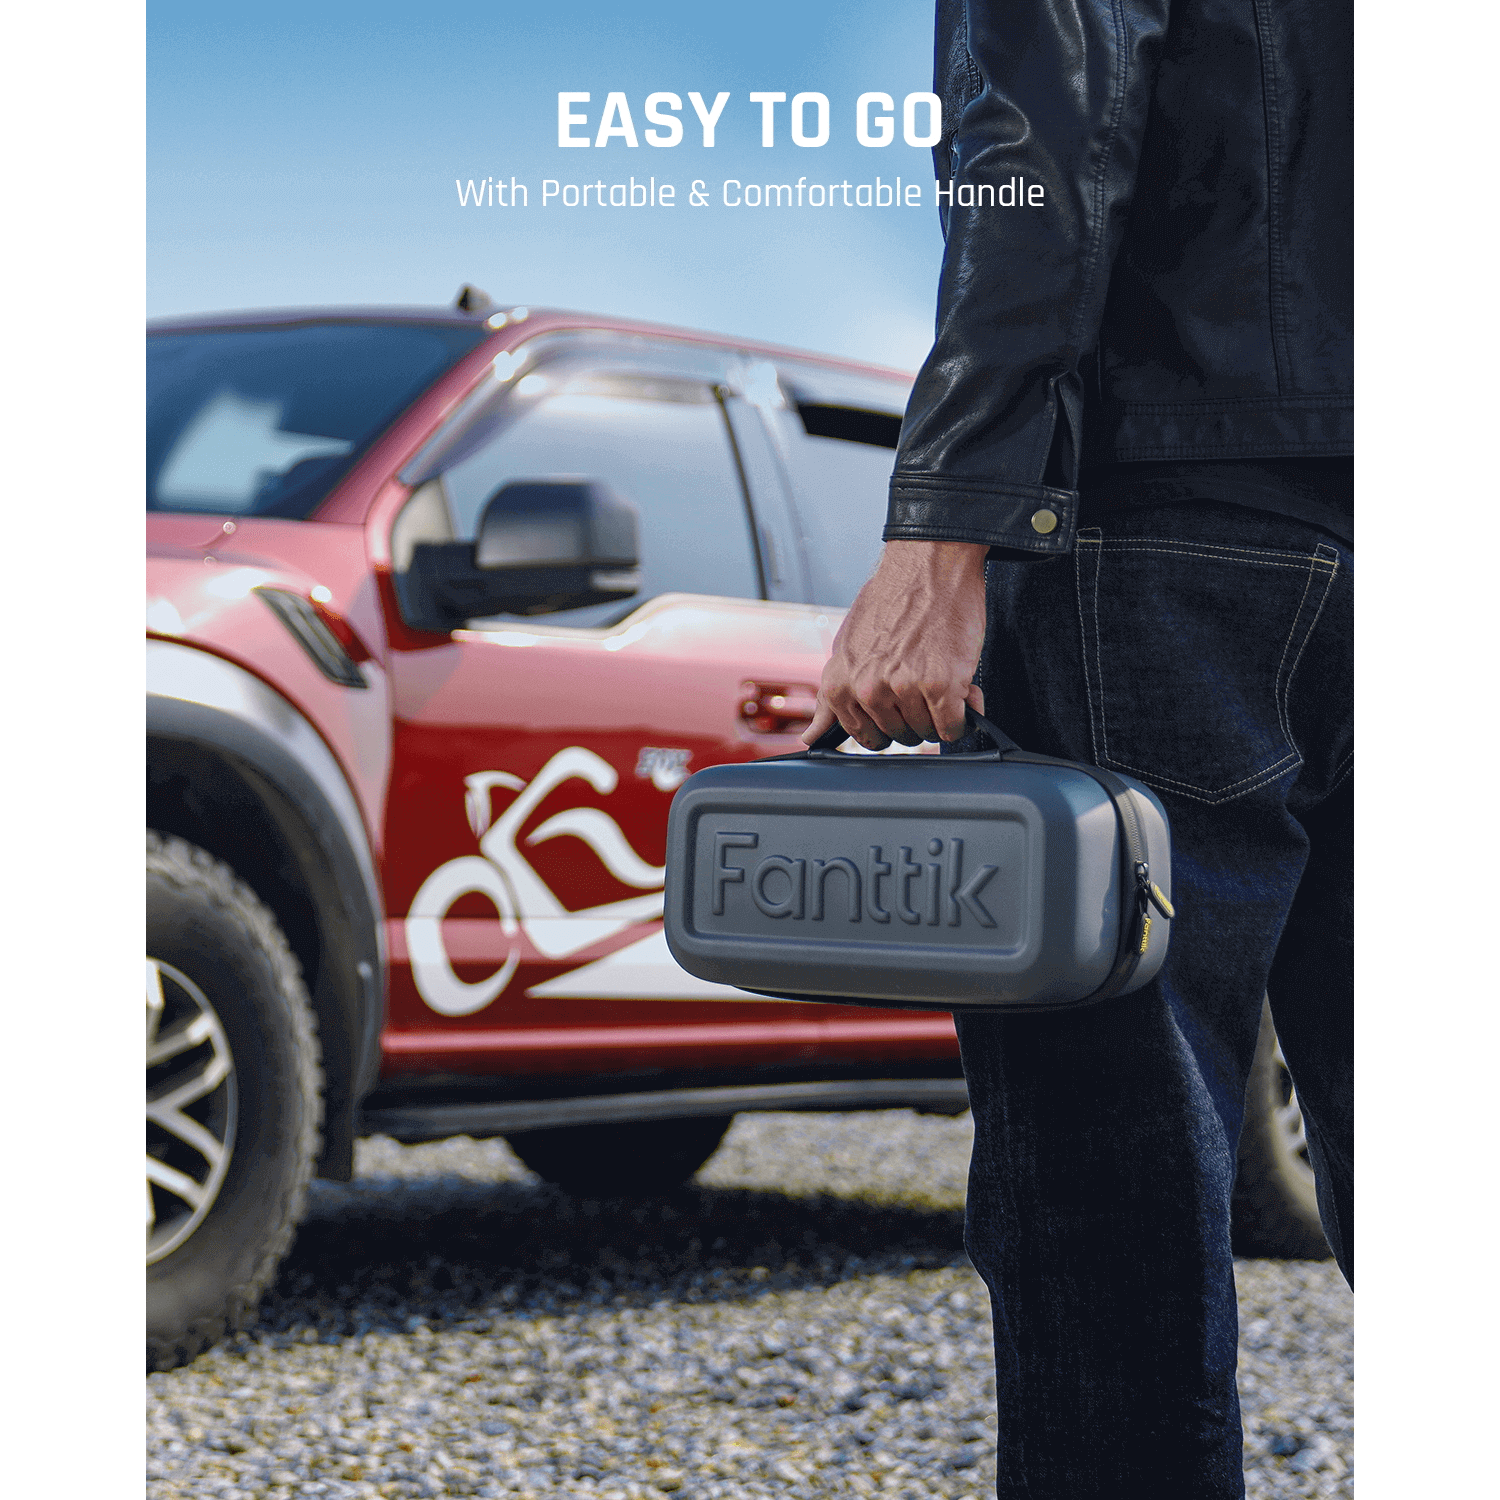 With the non-slip and comfortable handle, this portable and compact carrying case is easy to keep your T8 MAX jump starter and accessories together and take them everywhere.